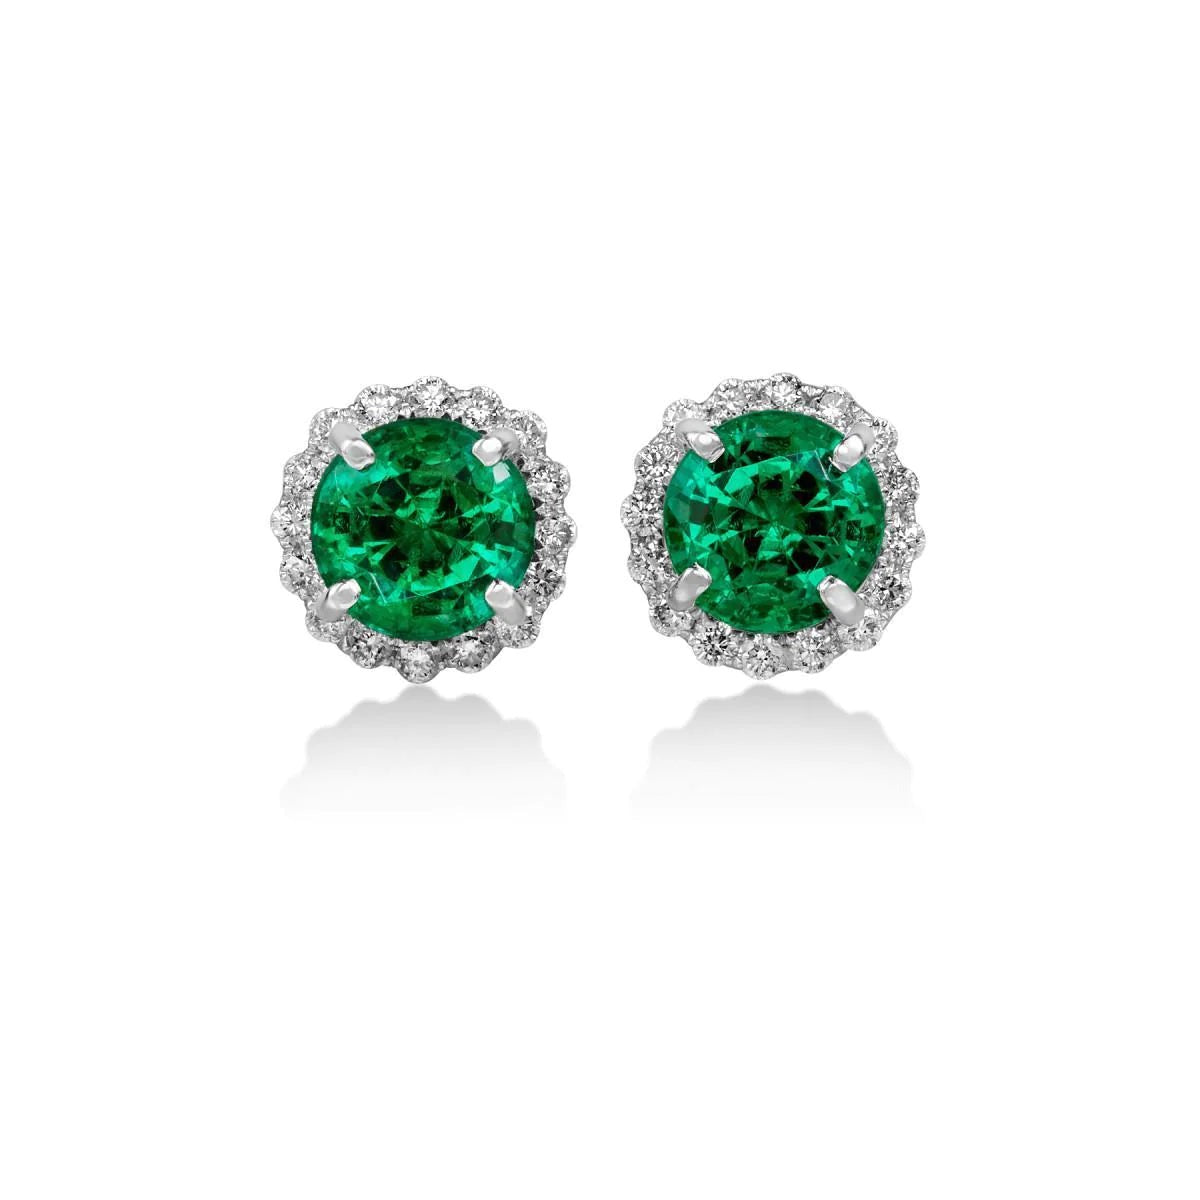 Green Emerald With Diamonds 5.80 Carats Stud Halo Earring White Gold 14K